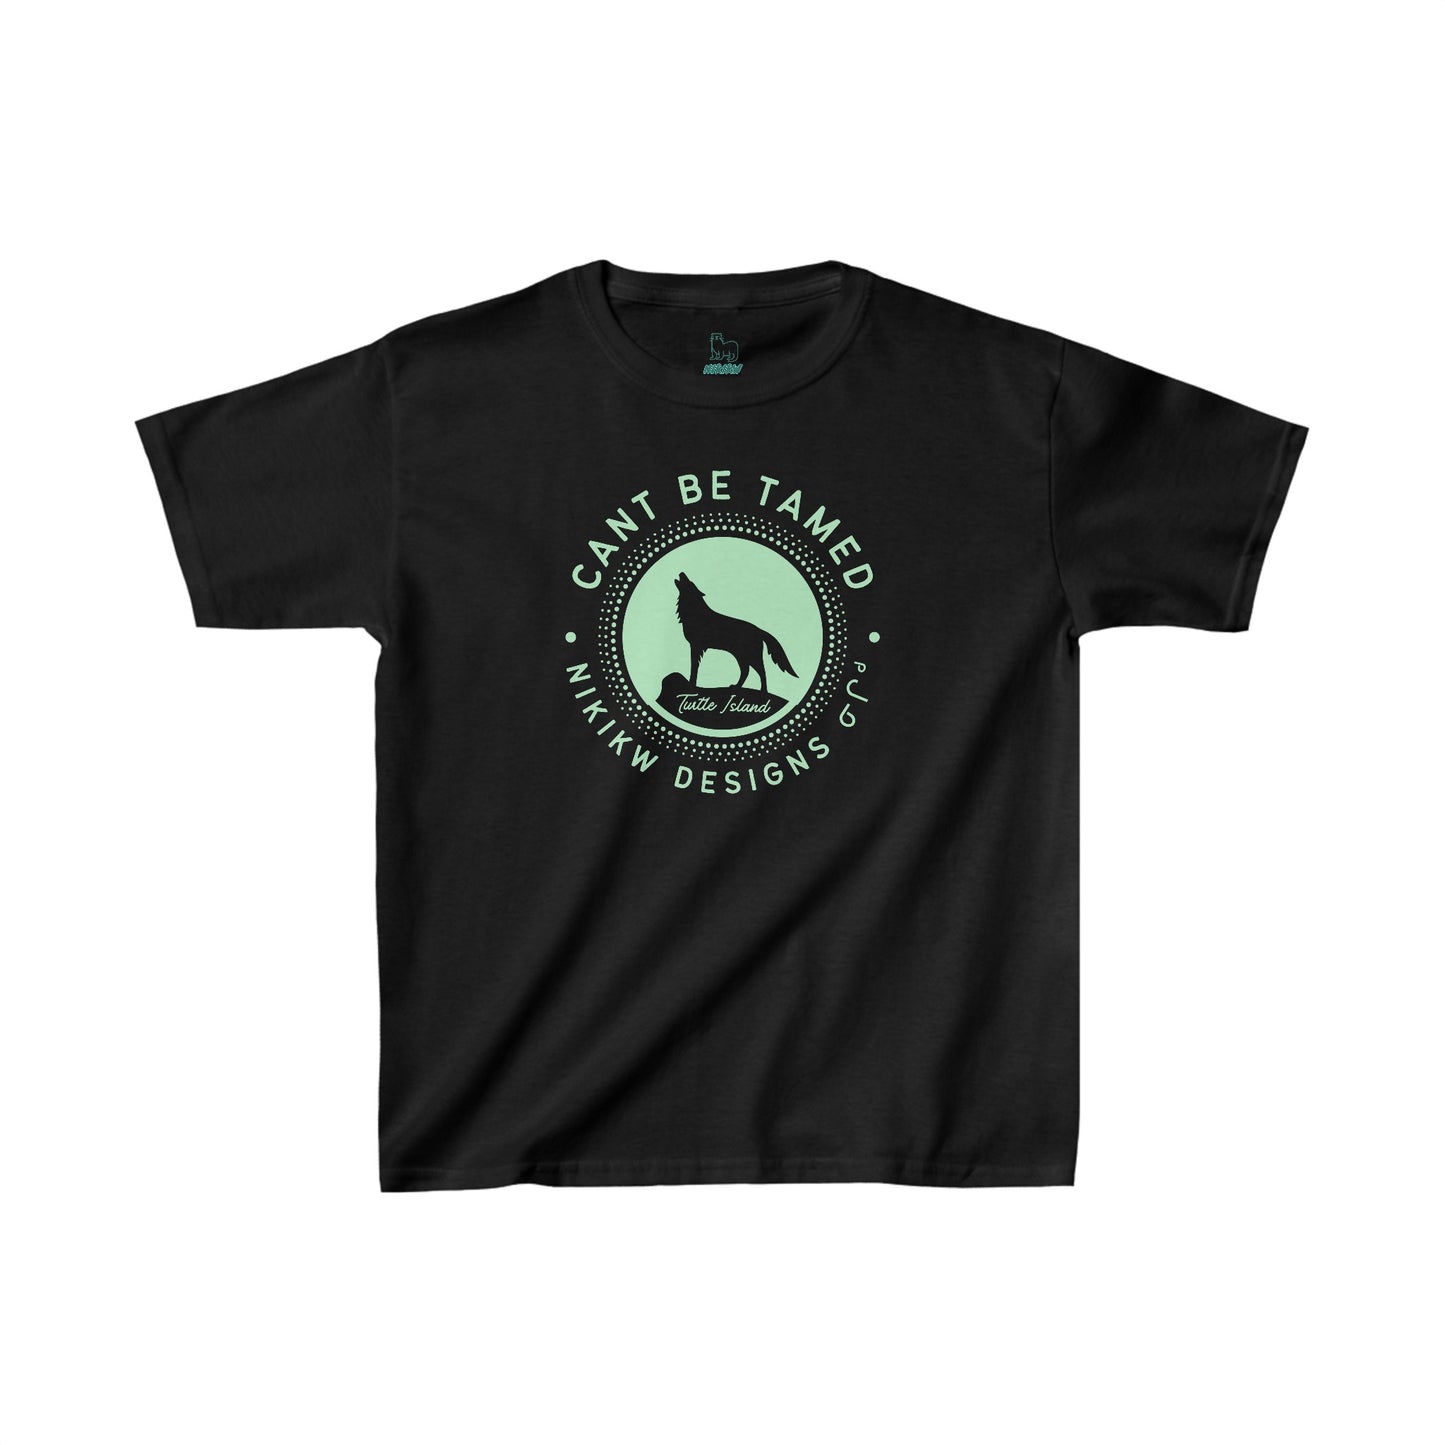 Cant Be Tamed Cotton Tee